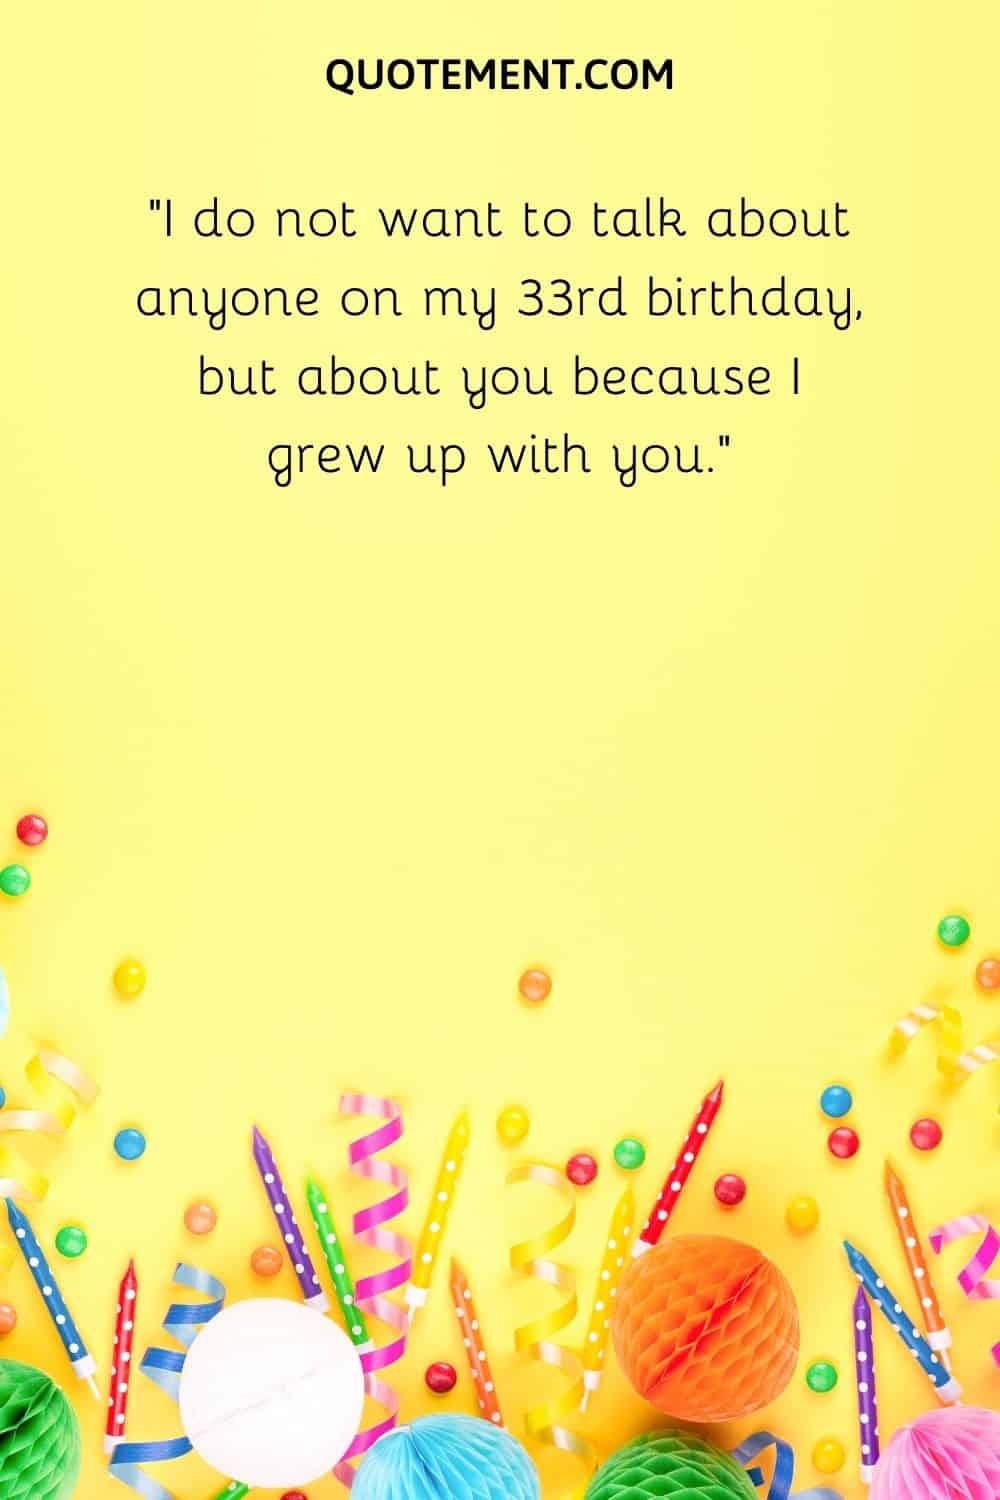 I do not want to talk about anyone on my 33rd birthday, but about you because I grew up with you.